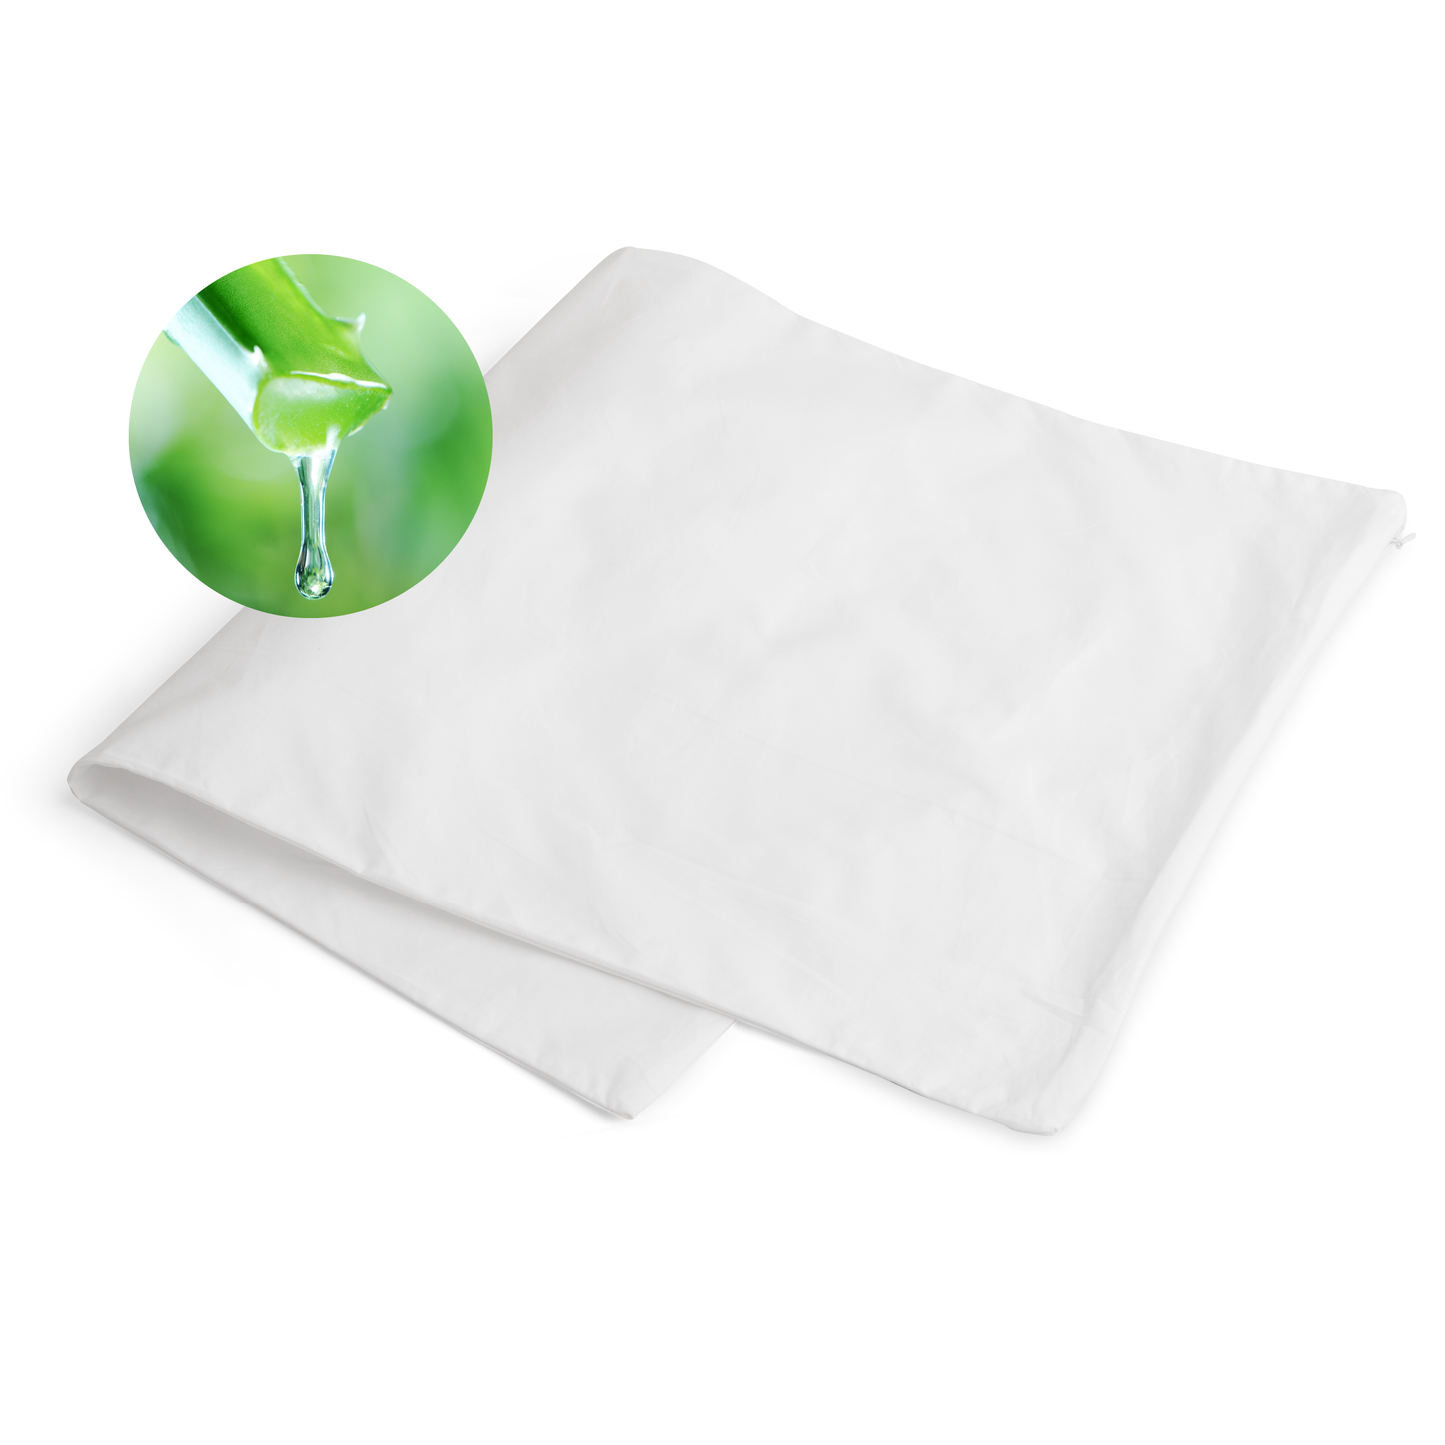 Aloe Vera Pillow Cover - 100% Cotton, Sooth your skin, protect your pillow